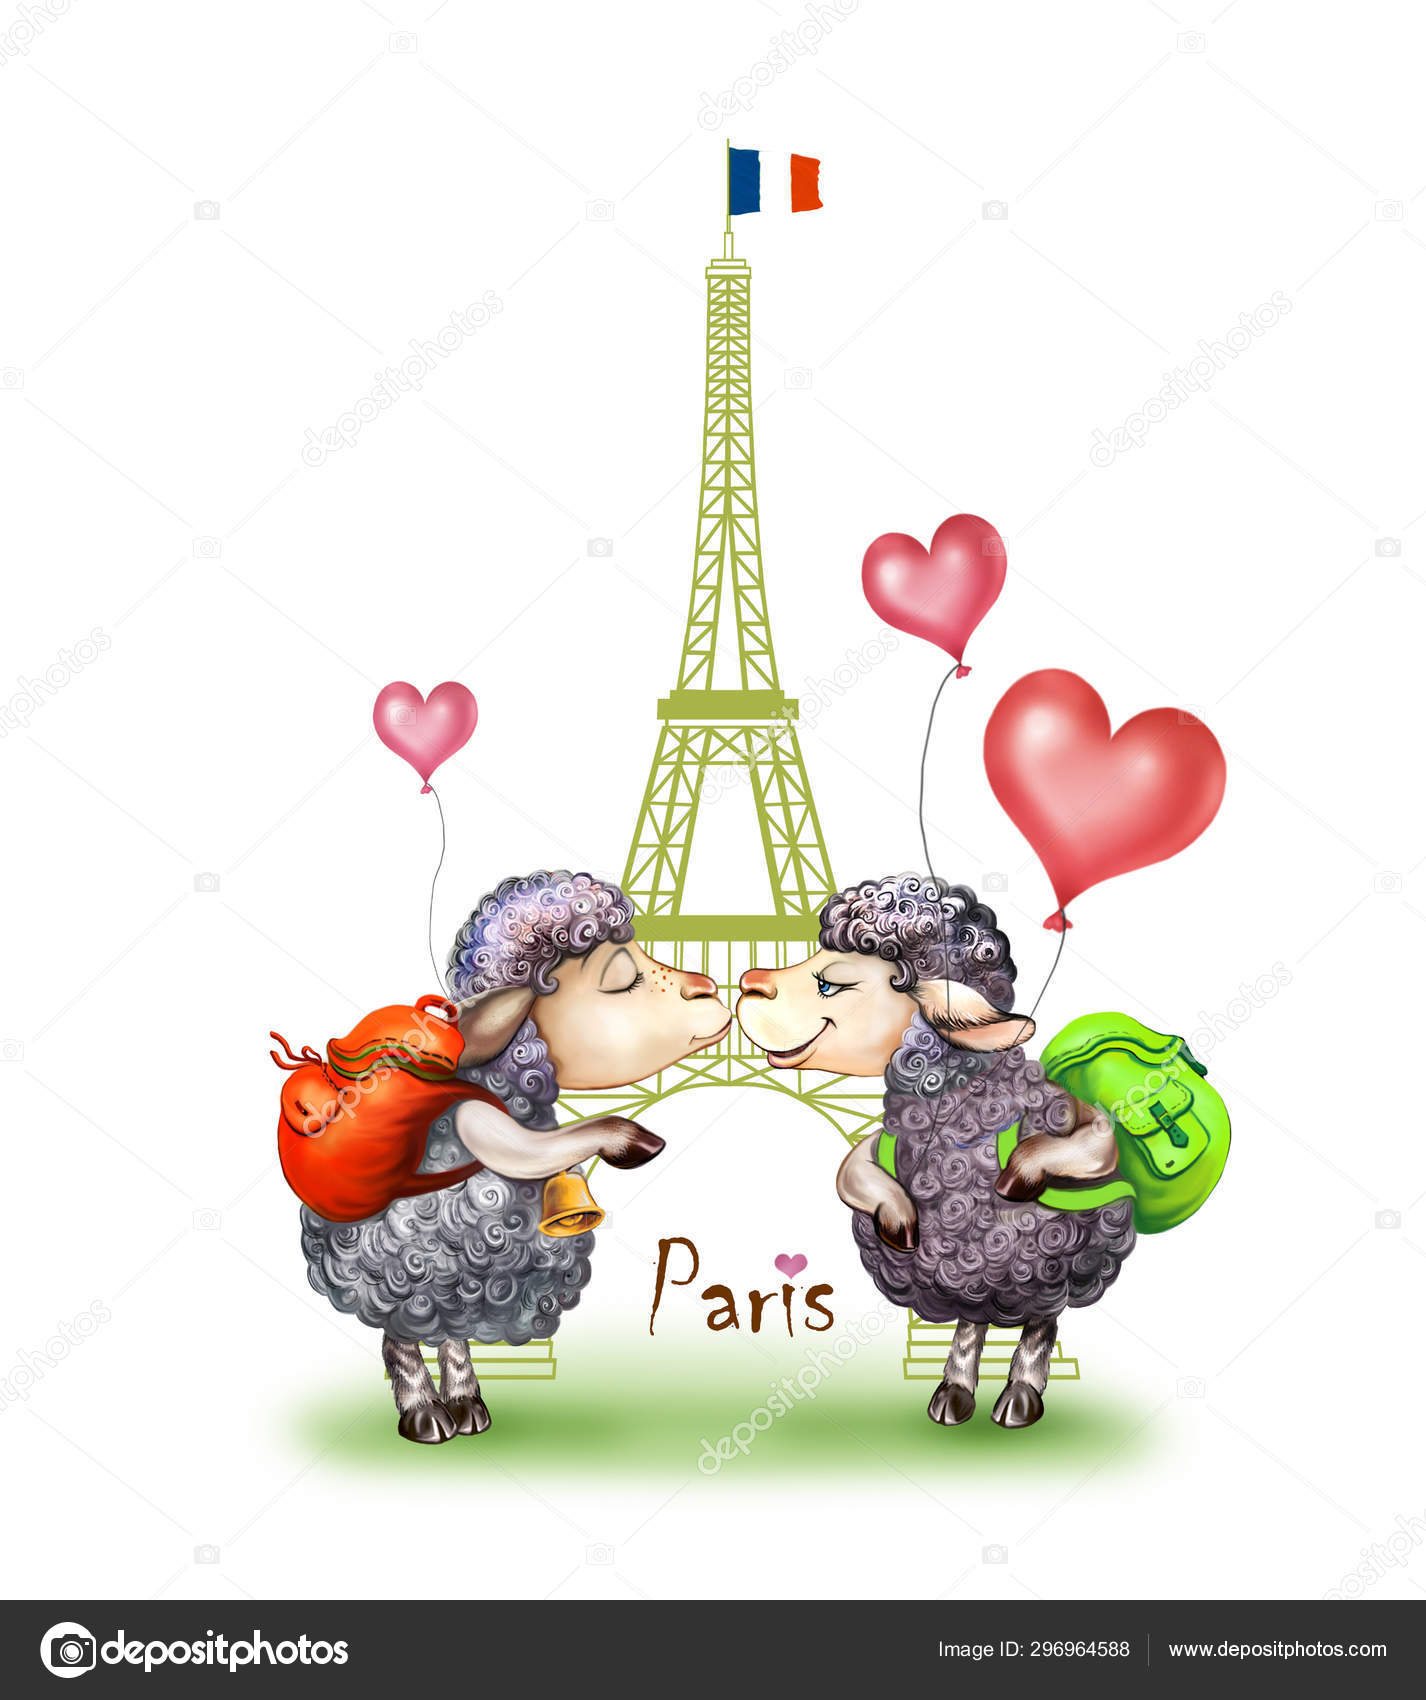 Two Travelers Eiffel Tower Cute Lovers Paris Two Cartoon Sheep Stock Photo  by © 296964588